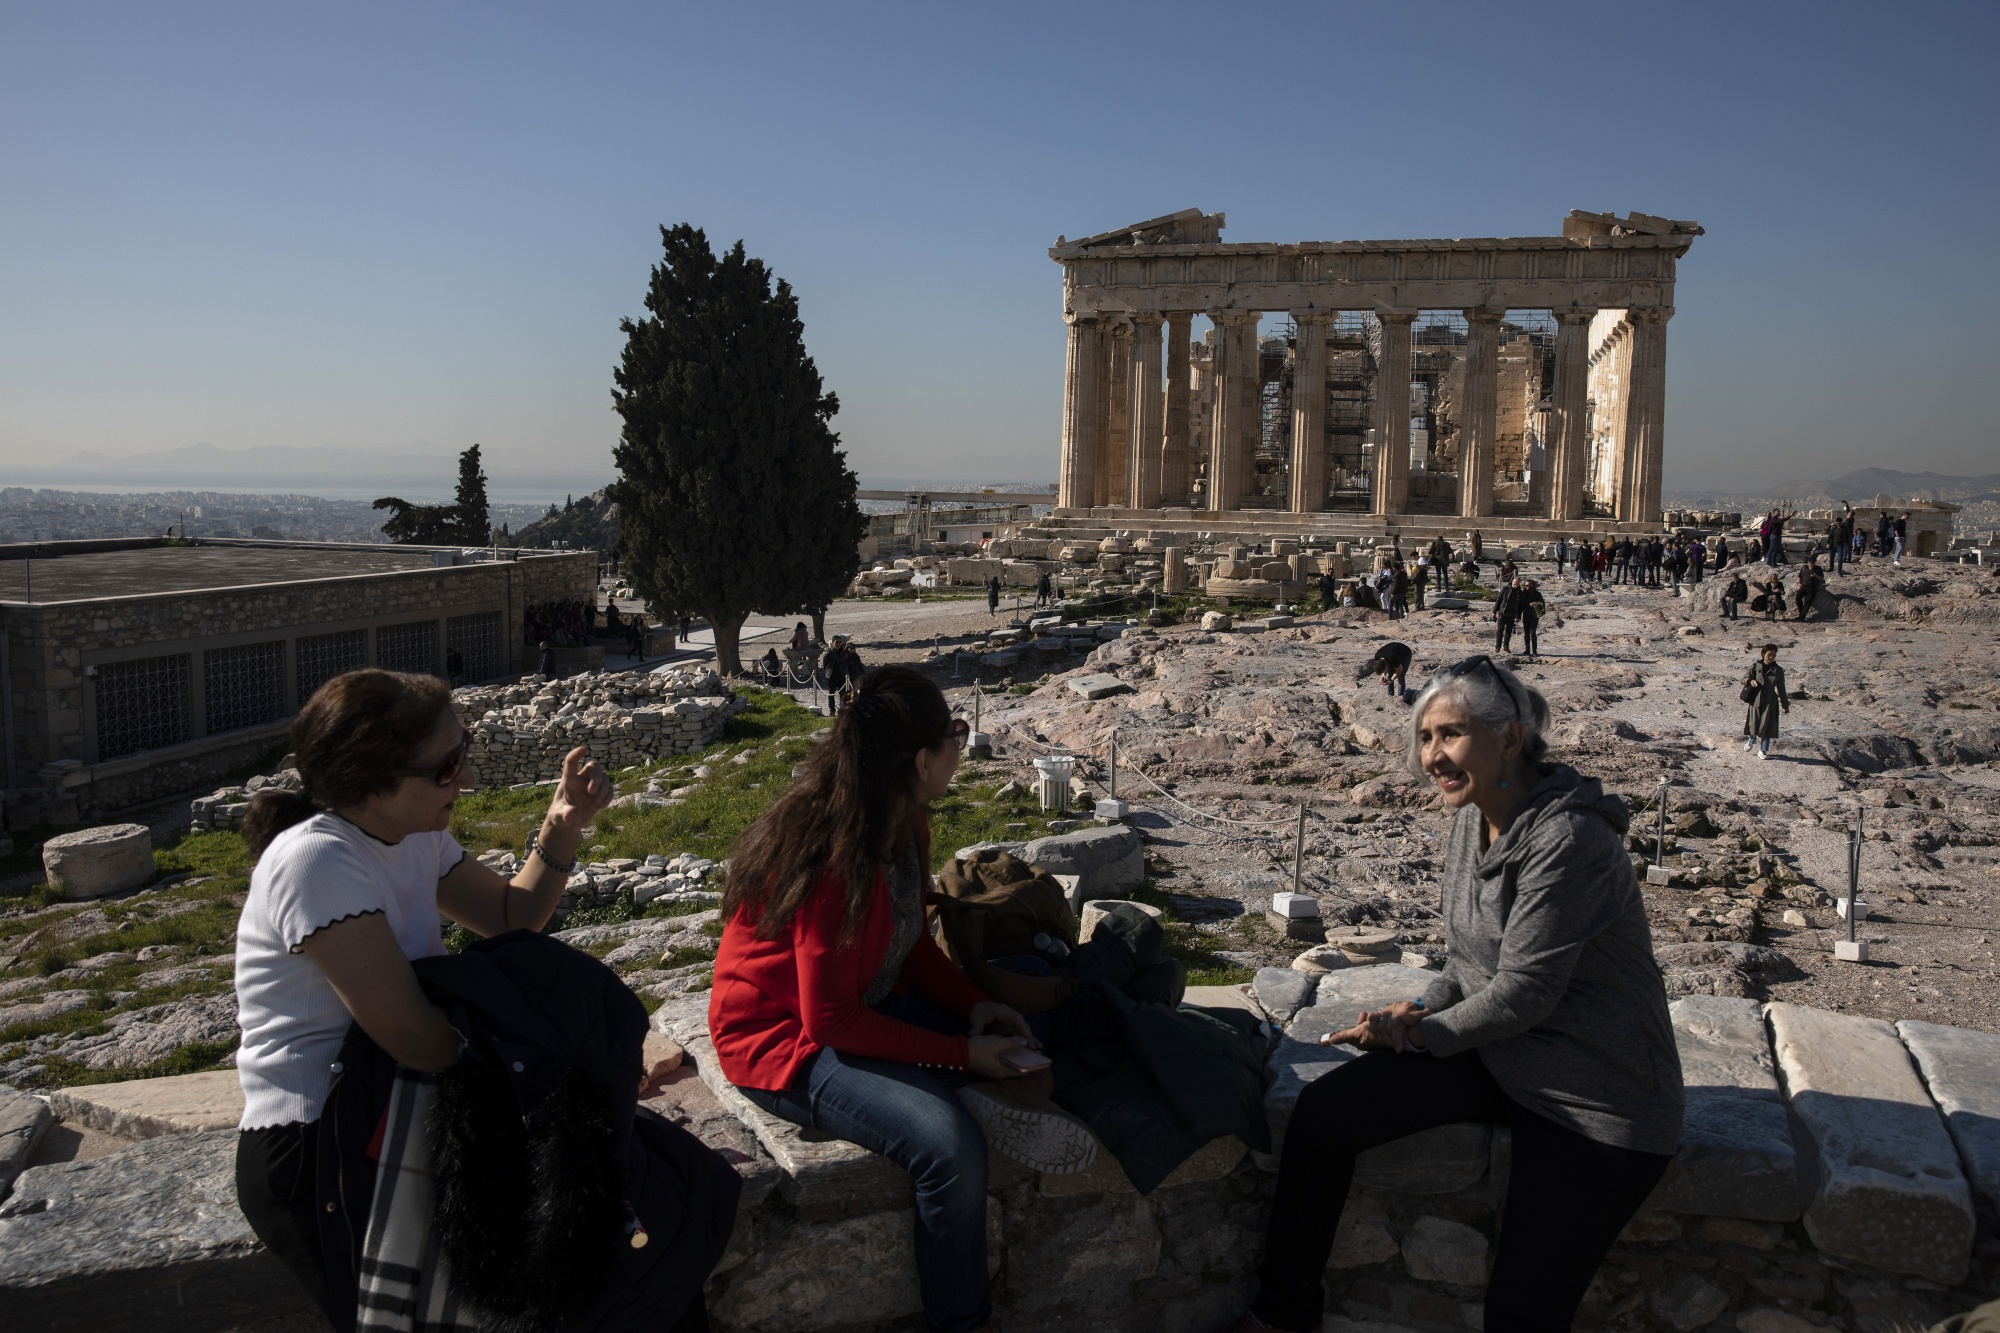 Tourists sit in front of the Parthenon temple on Acropolis Hill in Athens.